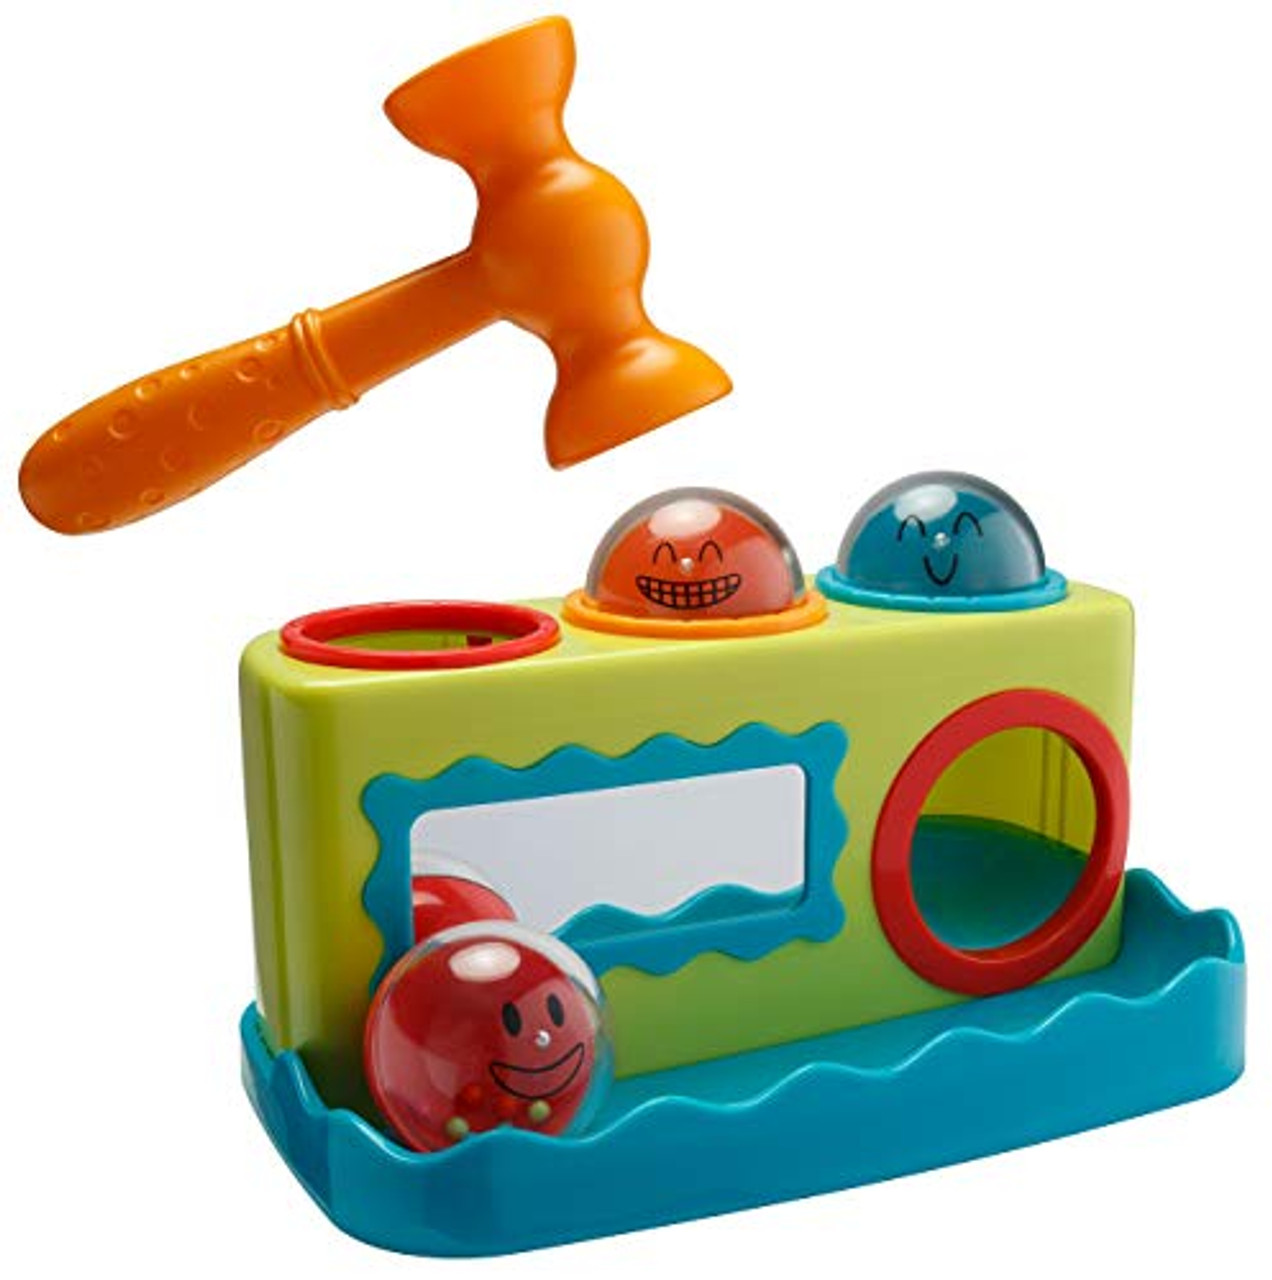 durable toys for kids